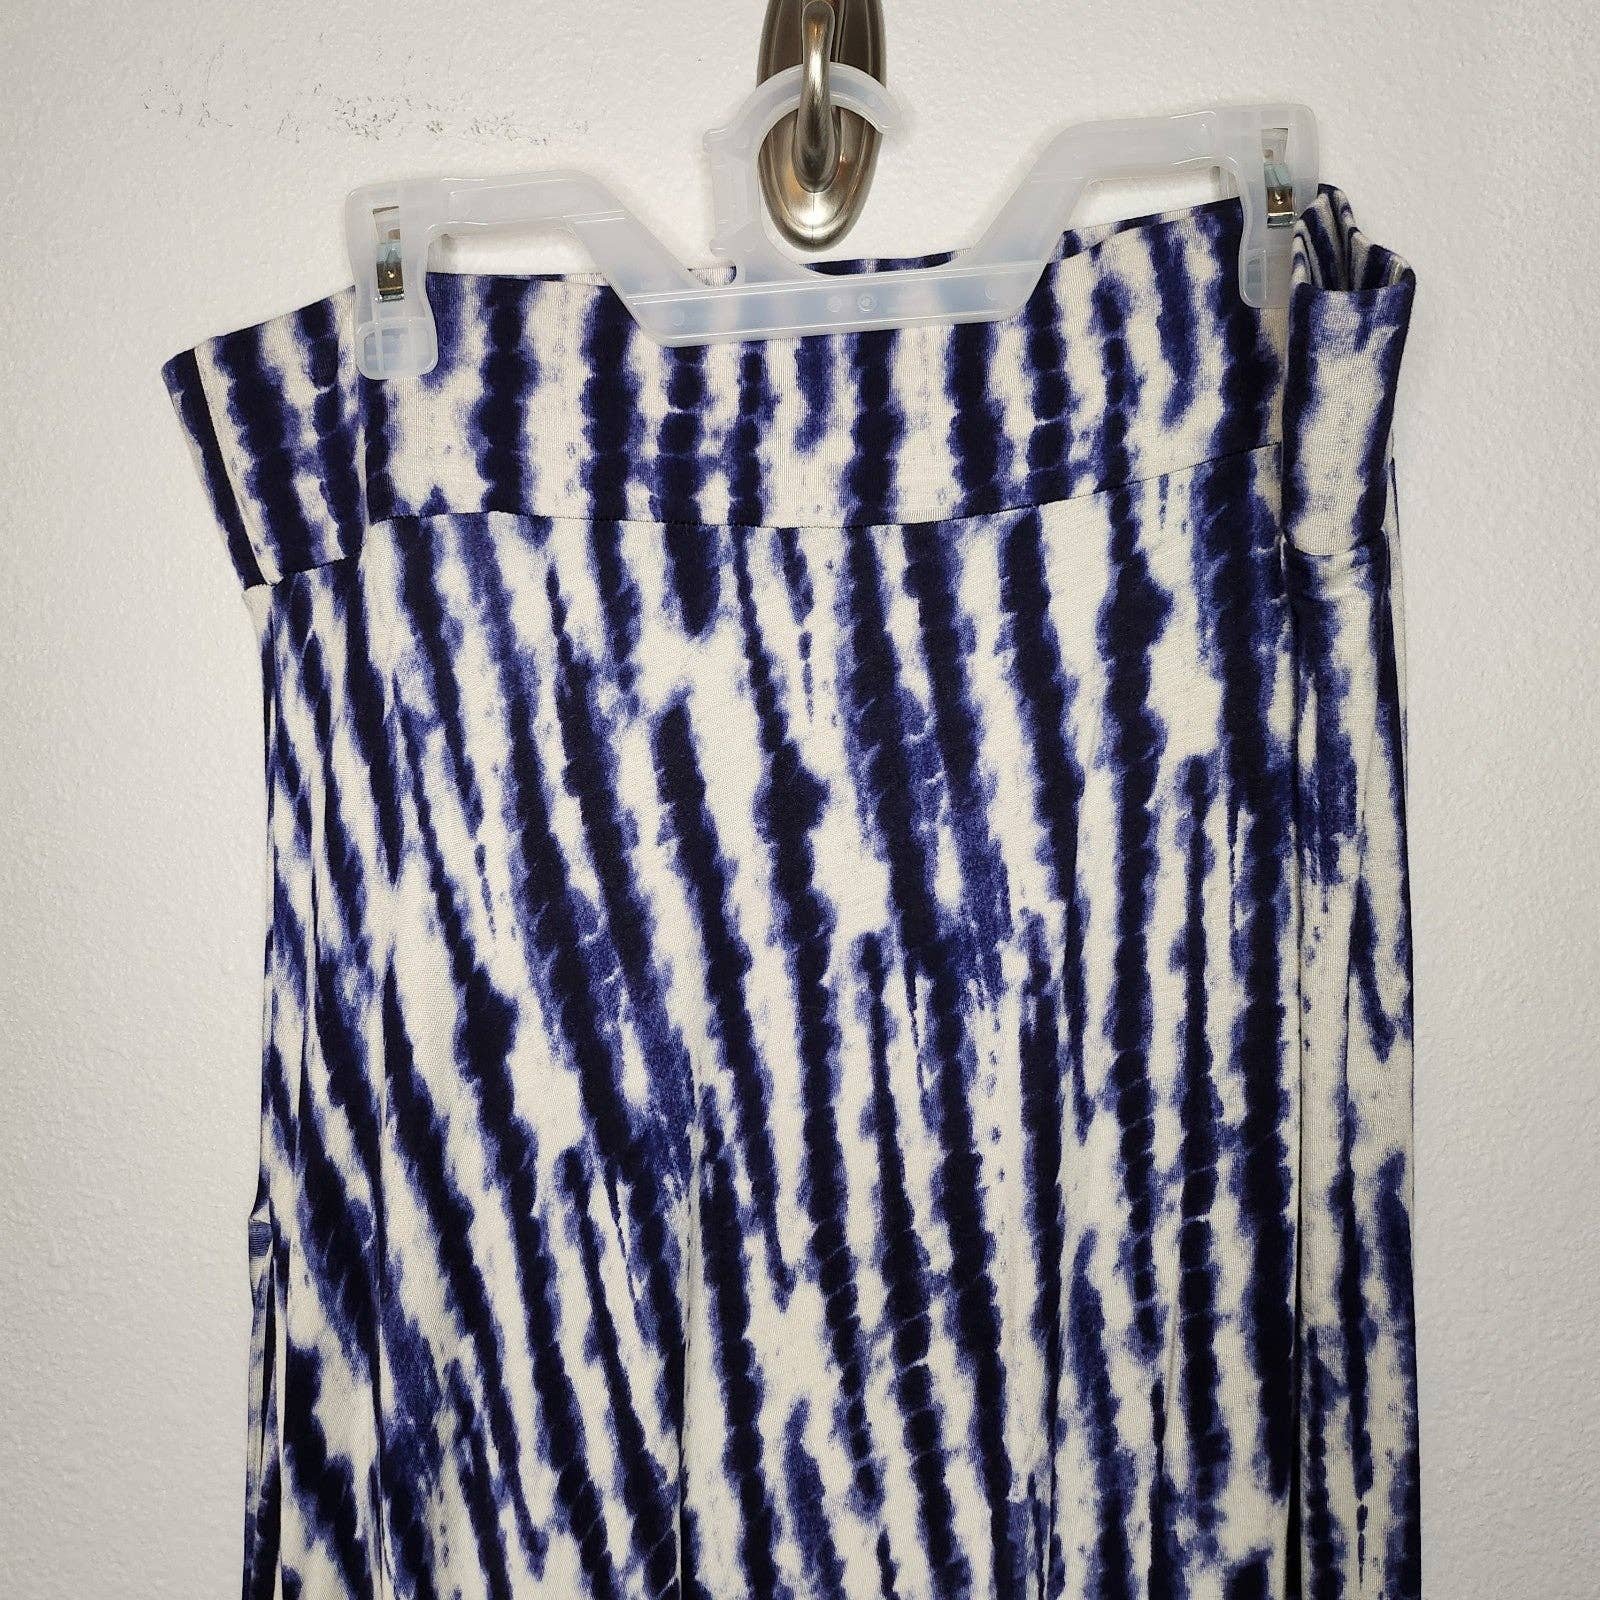 large discount LOGO BY LORI GOLDSTEIN PULL-ON PRINTED KNIT MAXI SKIRT BLUE A264587 SIZE 1X K8gTR0sc9 Outlet Store